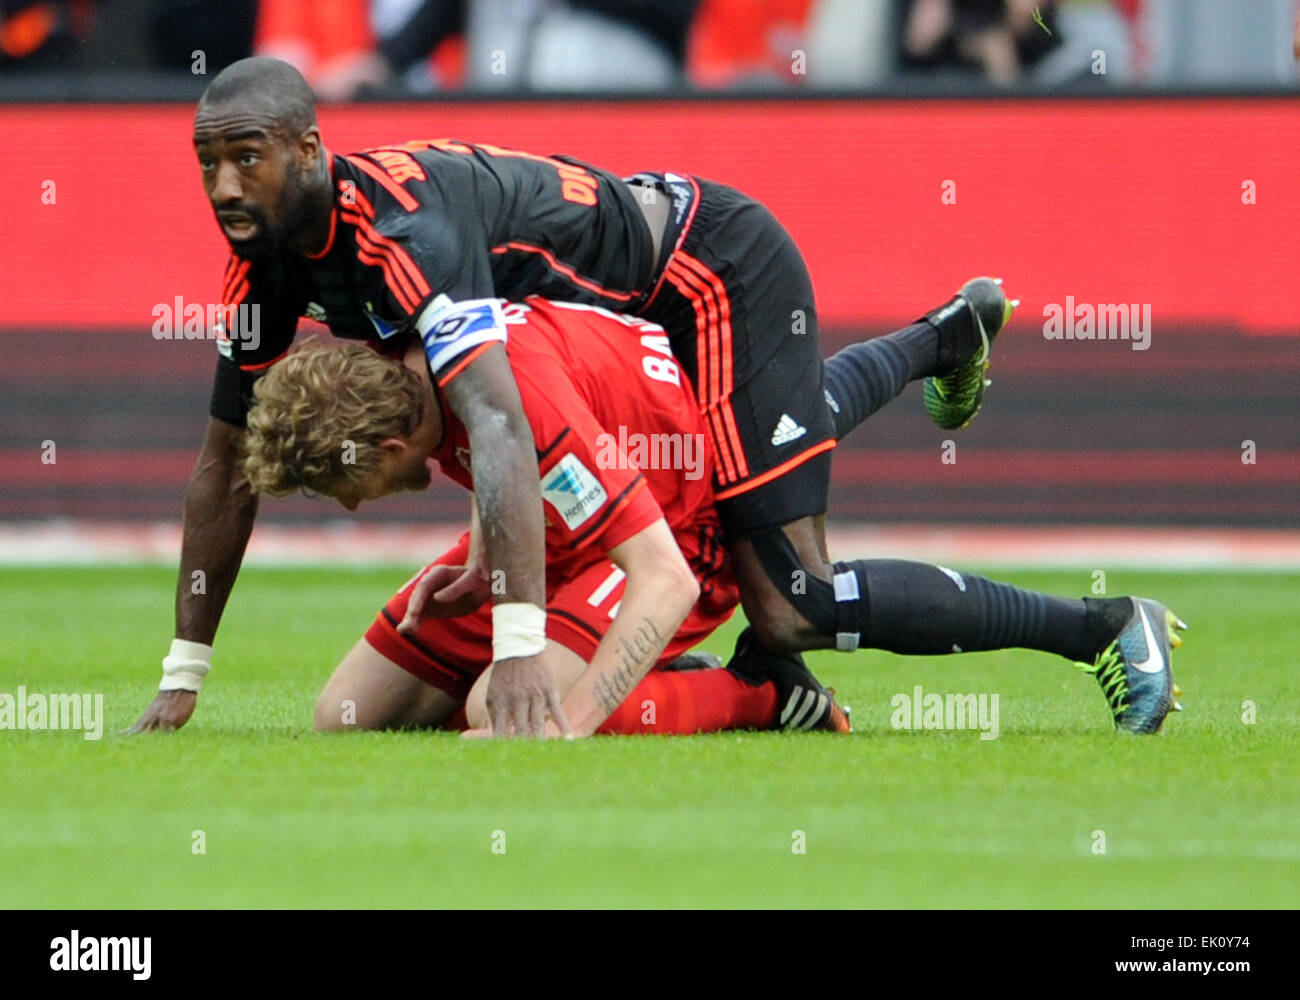 Leverkusen's Stefan Kiessling (bottom) and Hamburg's Johan Djourou fall after competing for the ball during the German Bundesliga soccer match between Bayer Leverkusen and Hamburger SV at the BayArena in Leverkusen, Germany, 4 April 2015. PHOTO: CAROLINE SEIDEL/dpa  (EMBARGO CONDITIONS - ATTENTION: Due to the accreditation guidelines, the DFL only permits the publication and utilisation of up to 15 pictures per match on the internet and in online media during the match.) Stock Photo